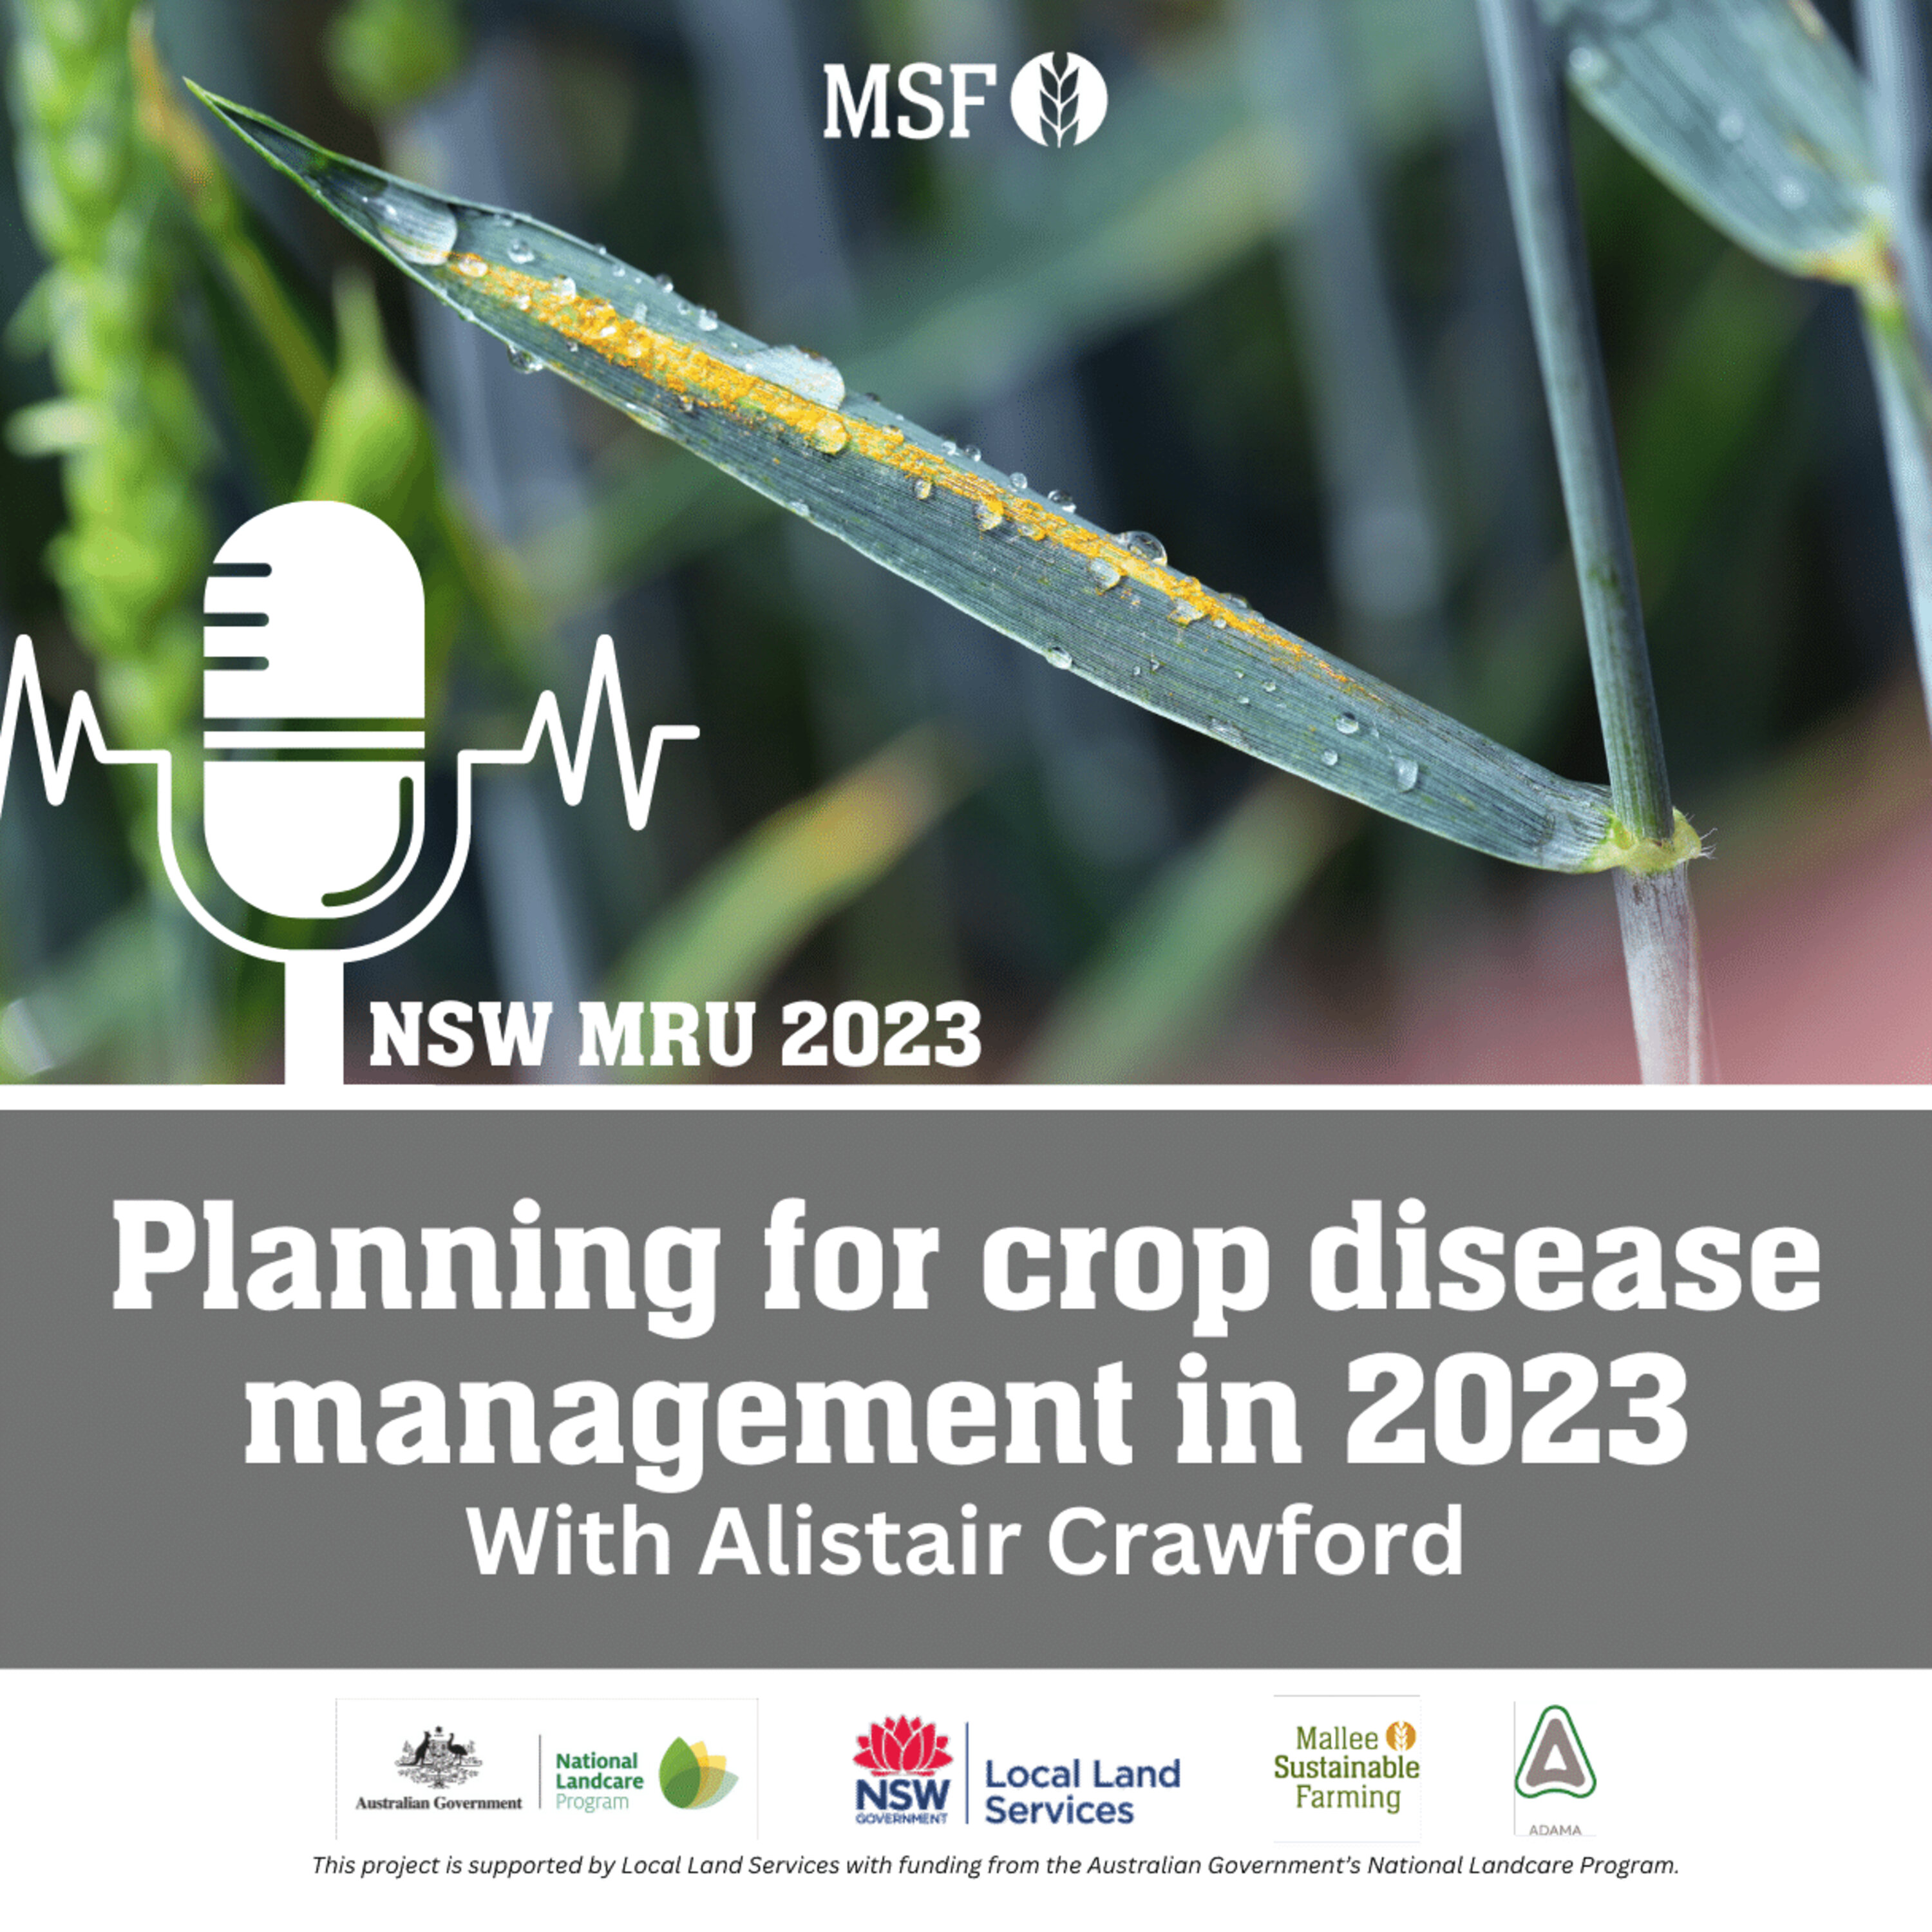 Leaf diseases to watch out for in '23 with Alistair Crawford